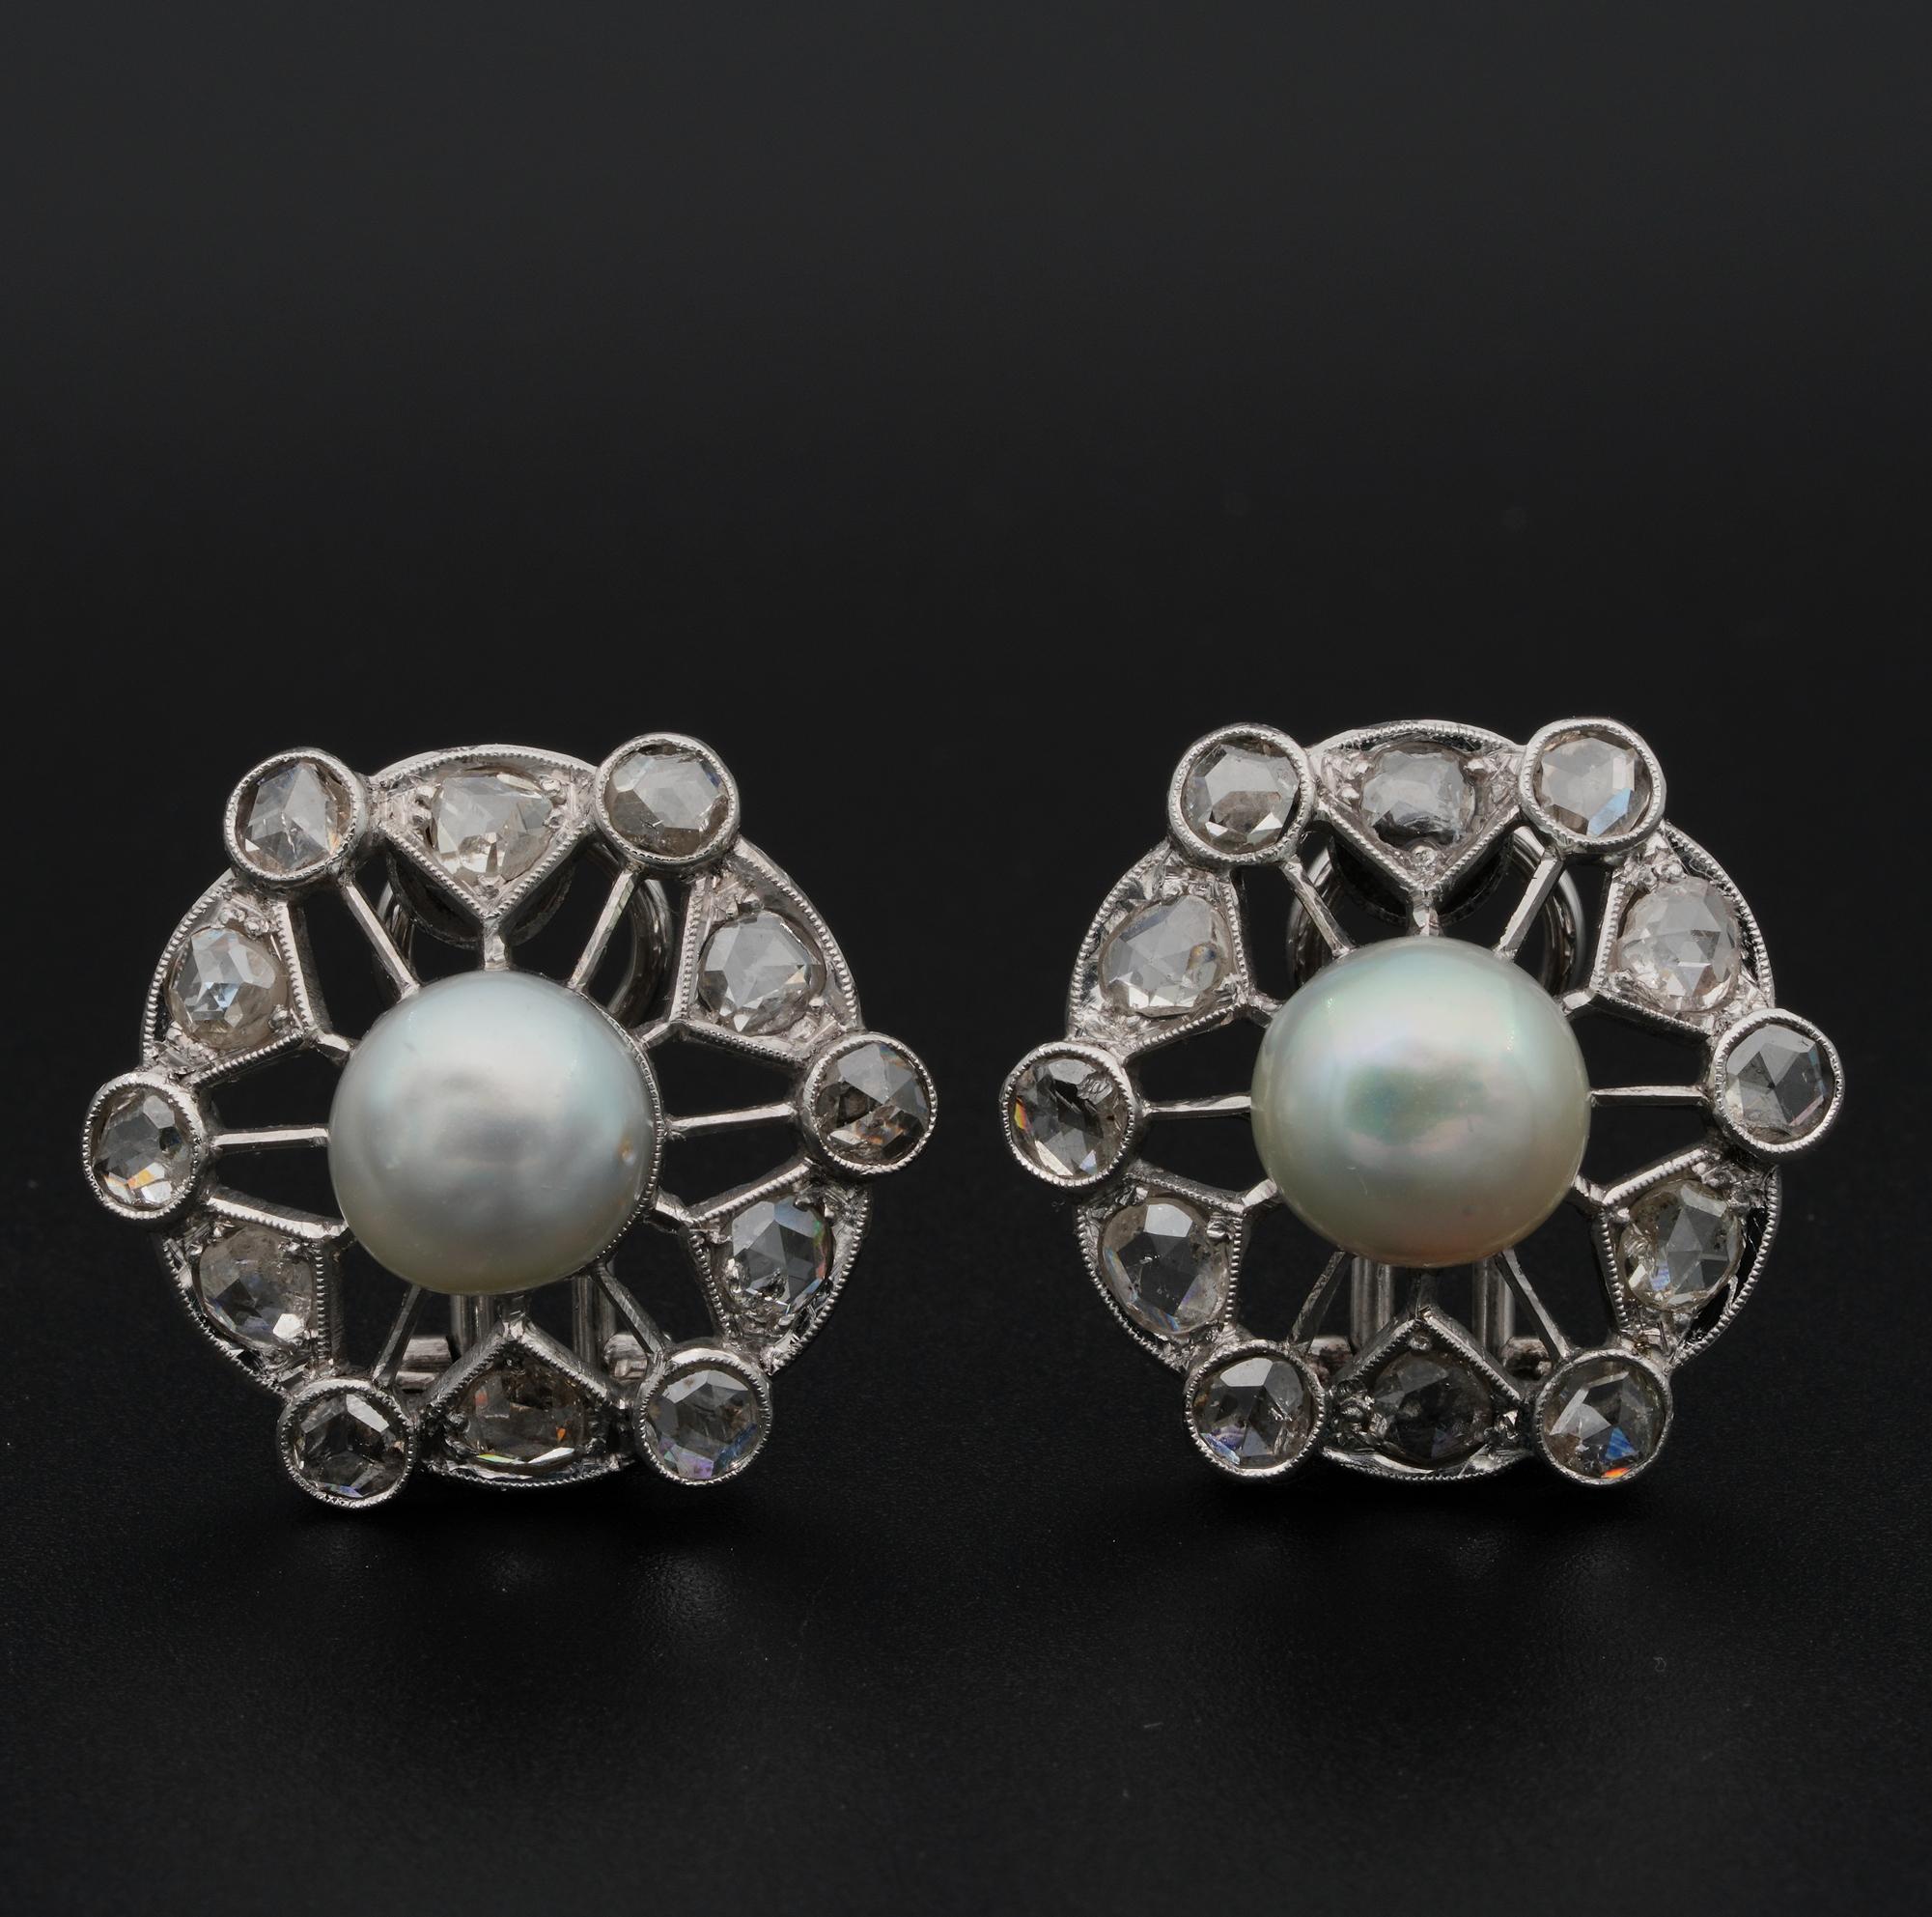 Art Deco wide Diamond & Pearl earrings, 1930 ca.
Prizing beautiful design and fine workmanship of the era.
Hand crafted solid Platinum
Set with a selection of rose cut Diamonds and fantastic Pearl in the middle
Approx 3.0 Ct of Diamonds in total